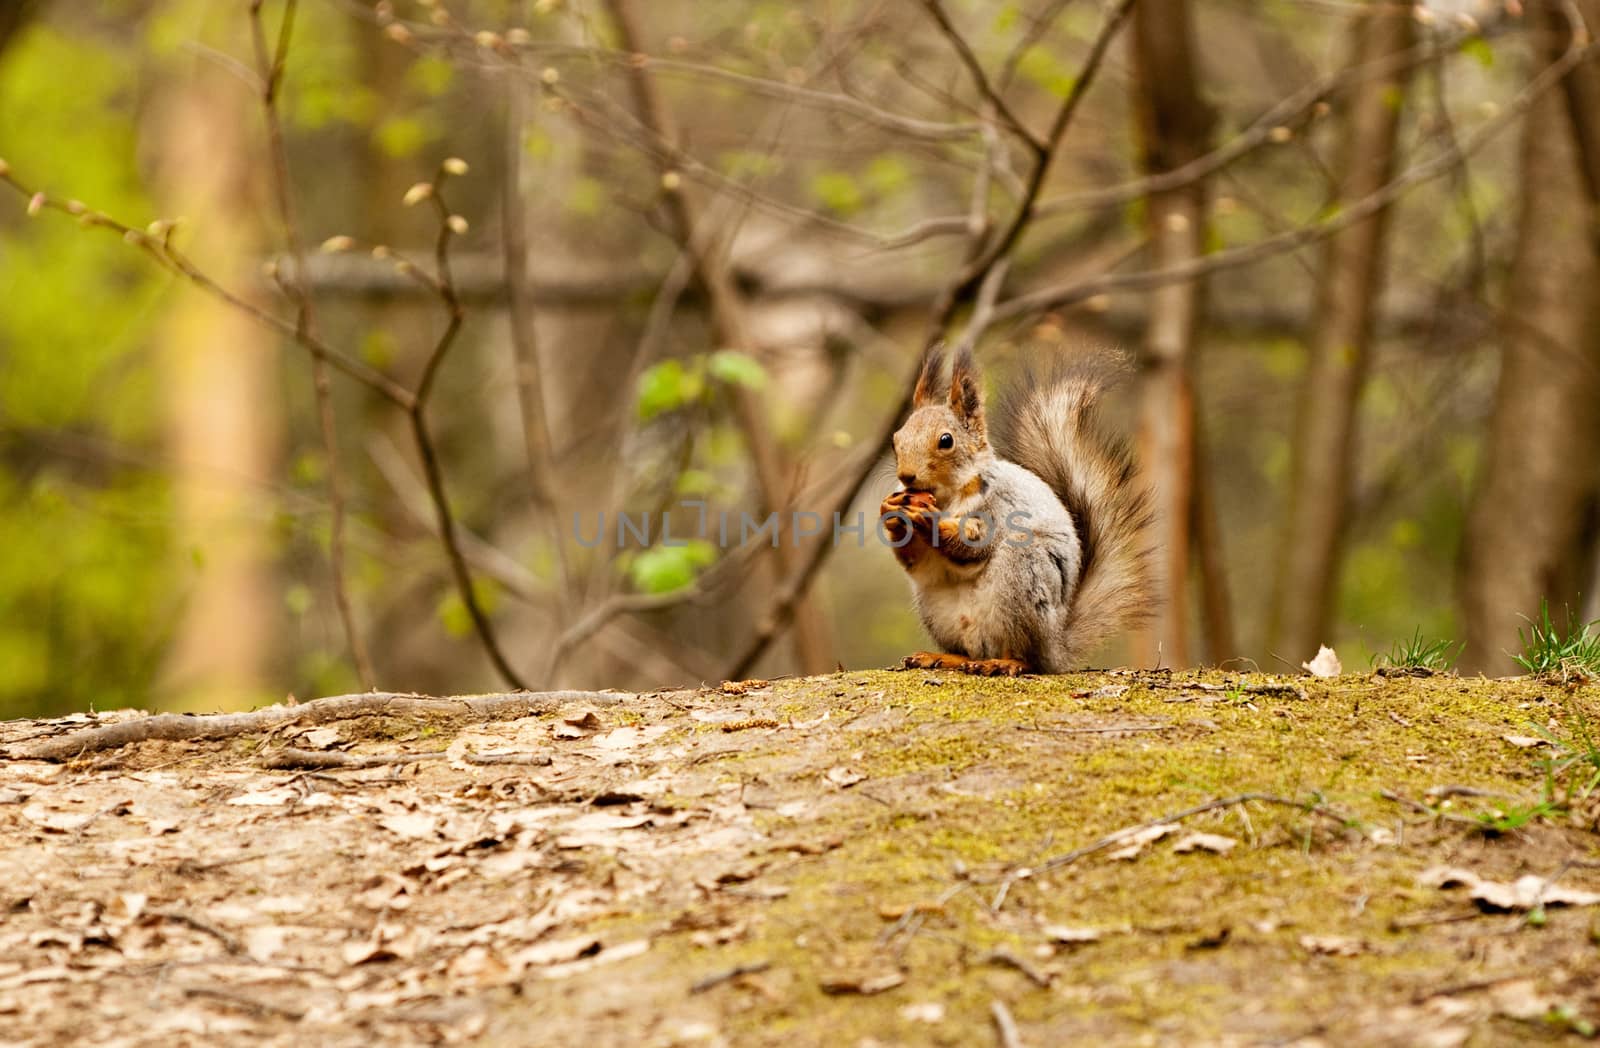 Little squirrel eating nut in park at spring by lexan